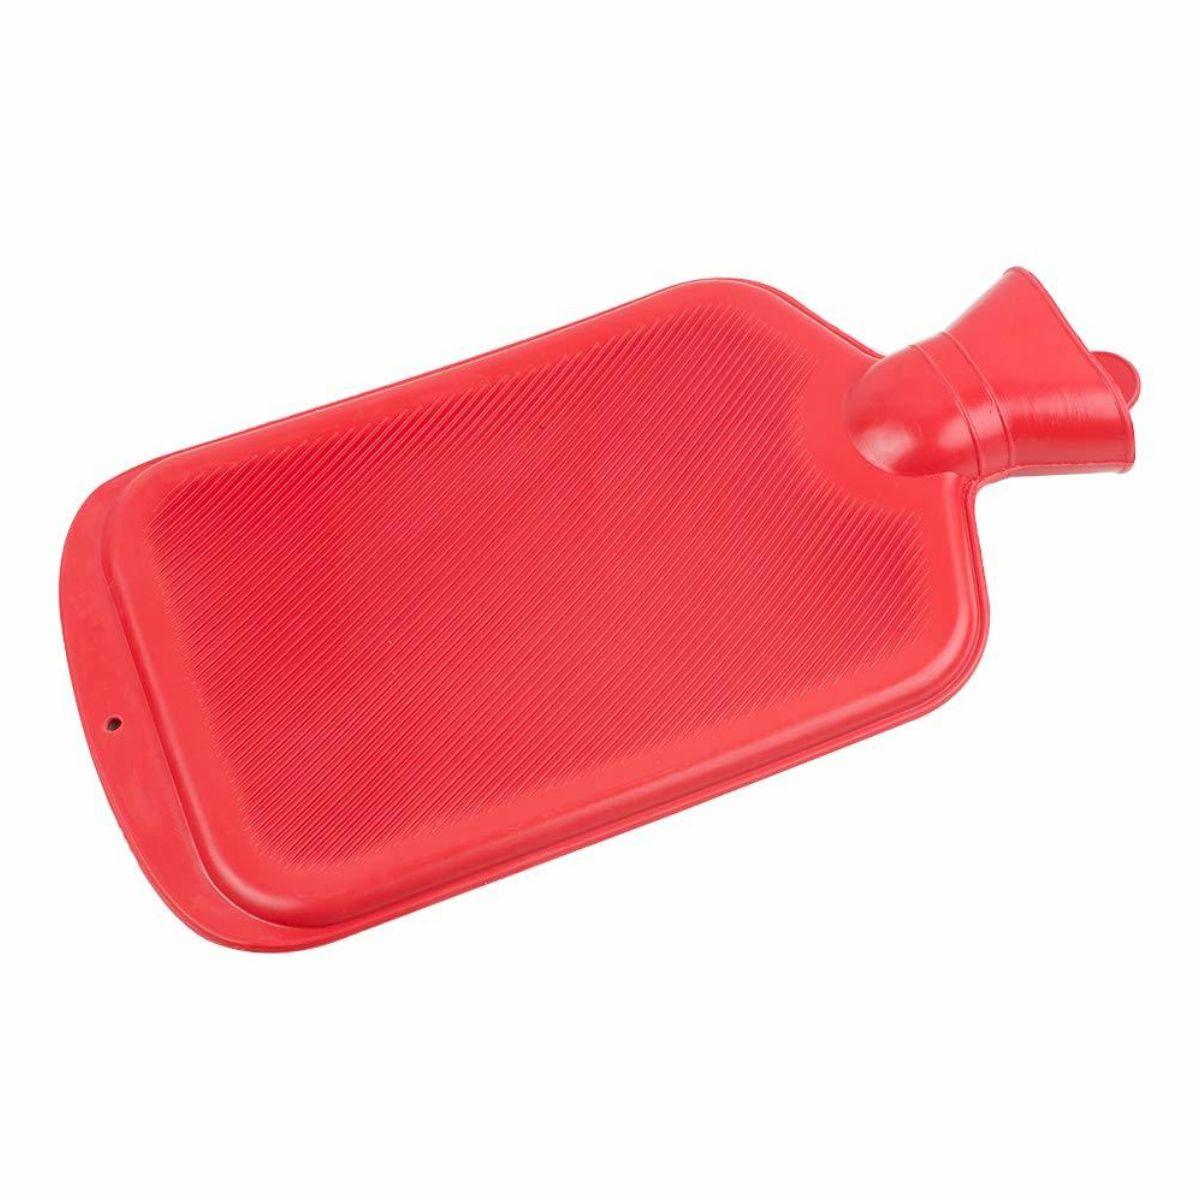 Ortho Hot Water Bag - tcistarhealthproducts